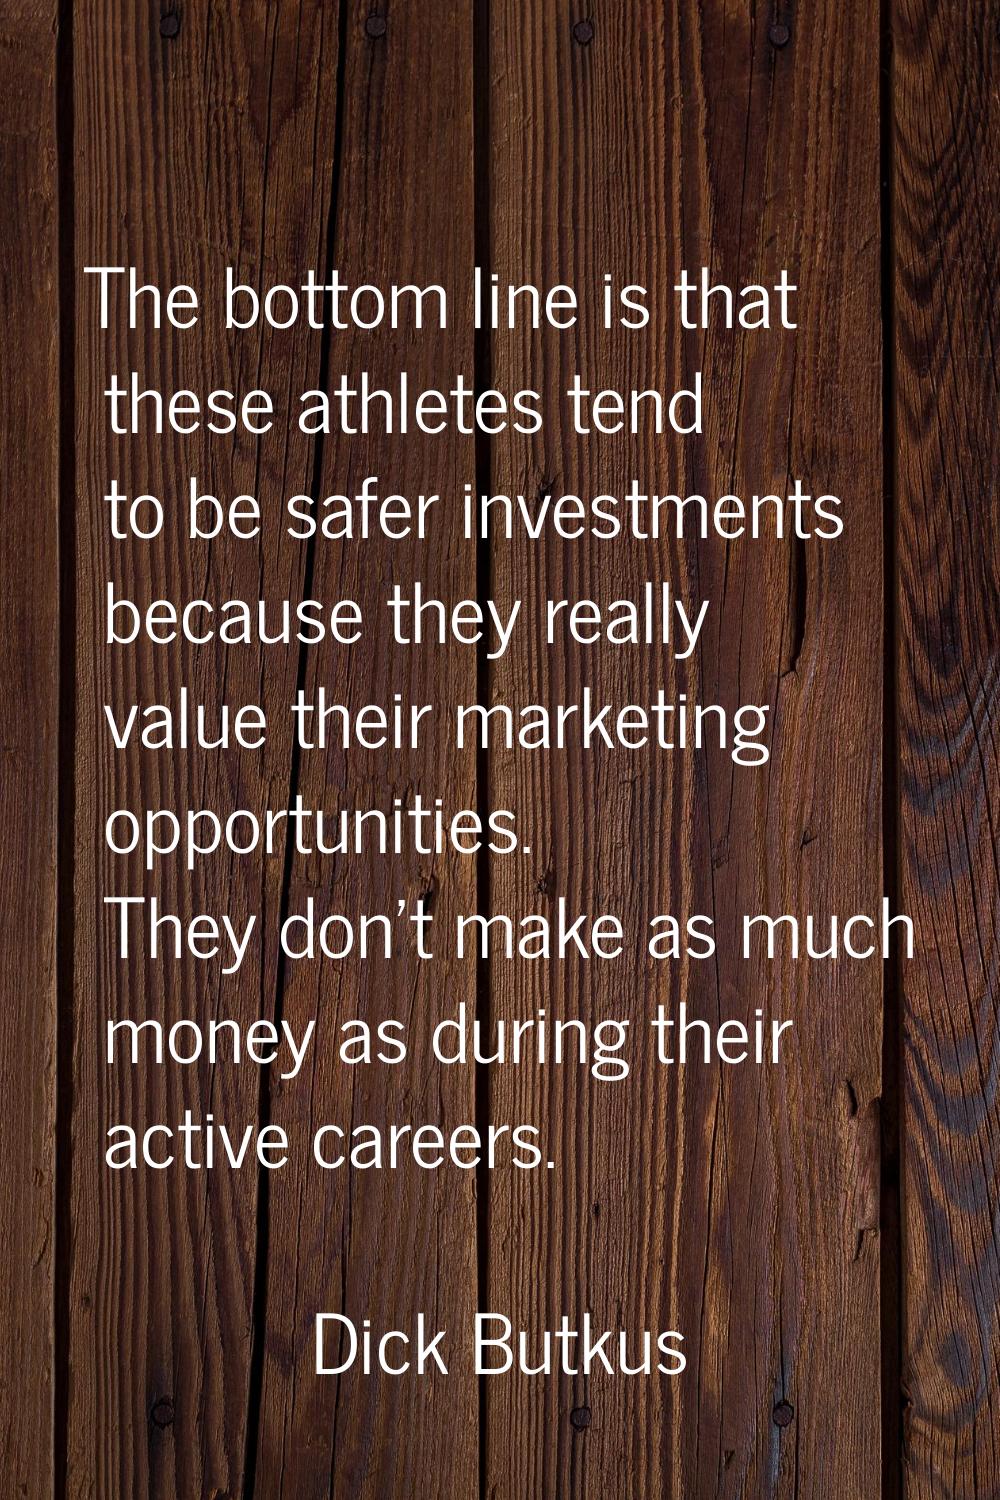 The bottom line is that these athletes tend to be safer investments because they really value their